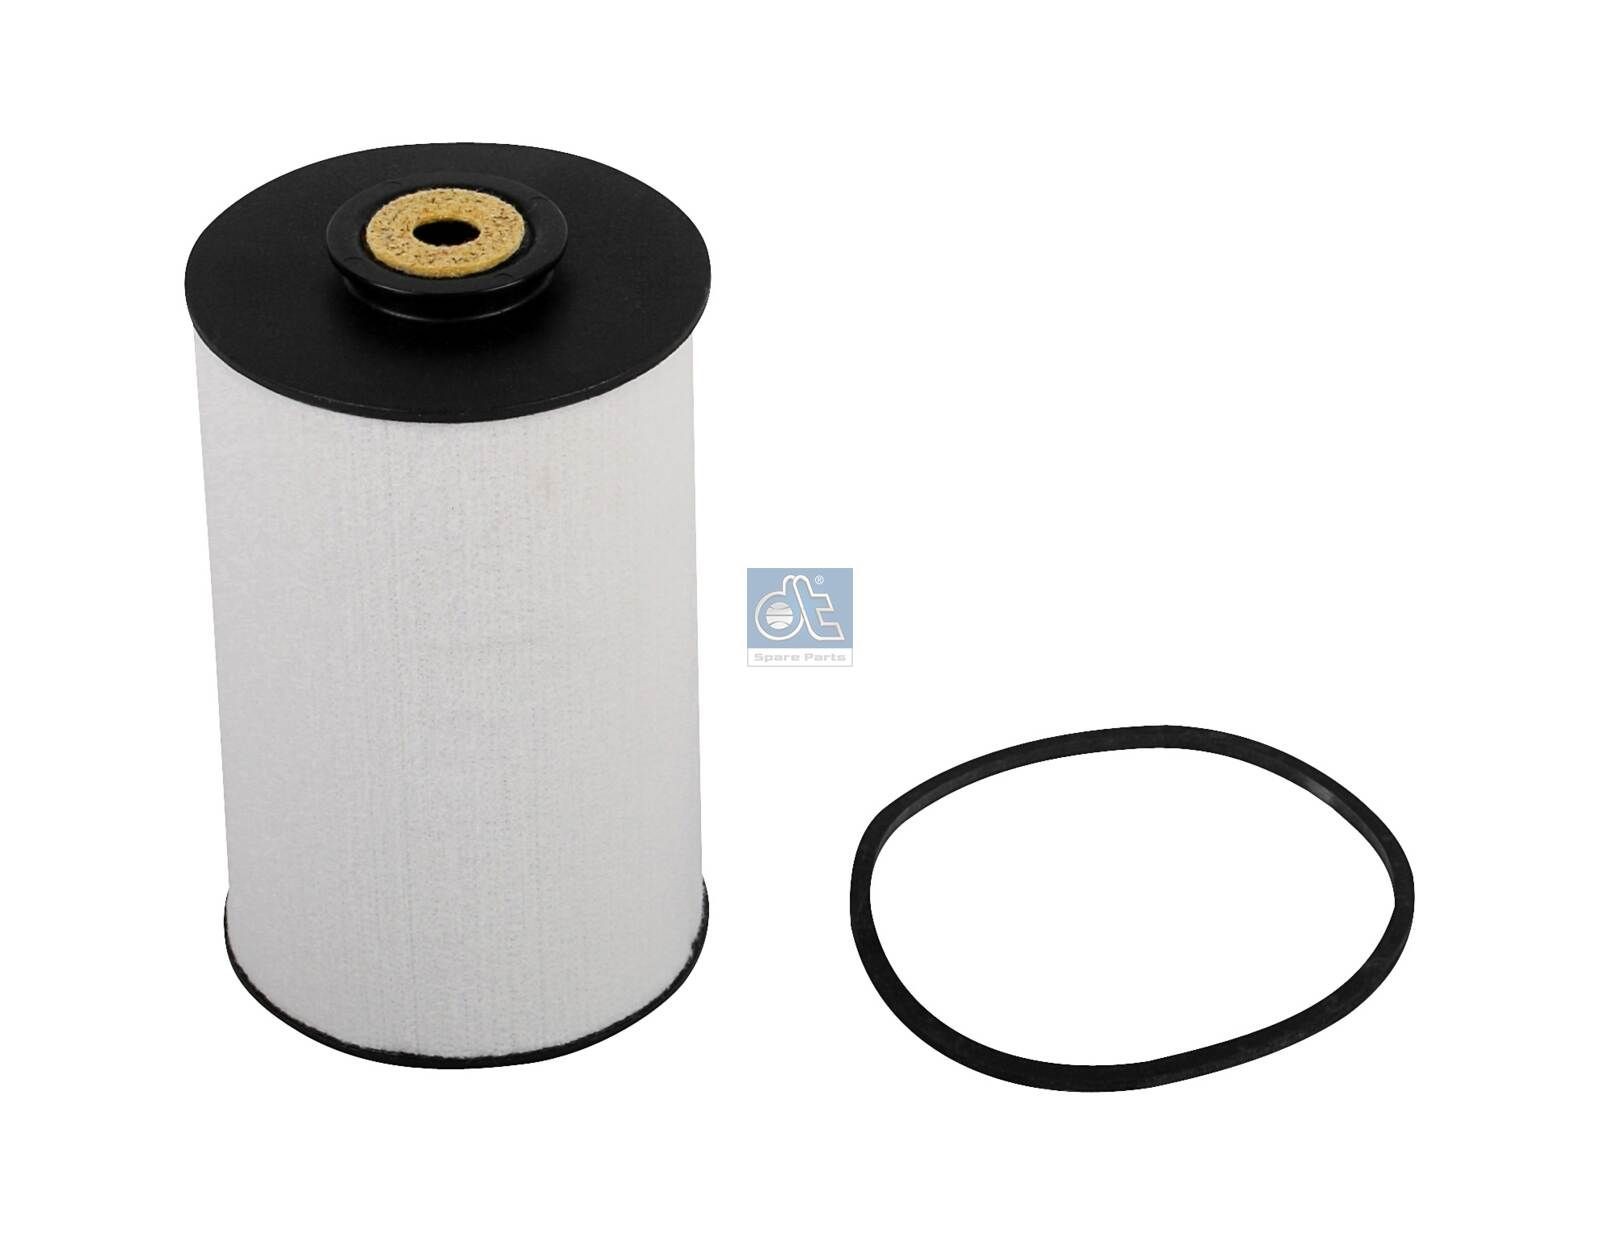 BFU 900 x DT Spare Parts 4.61531 Fuel filter A422 090 00 51